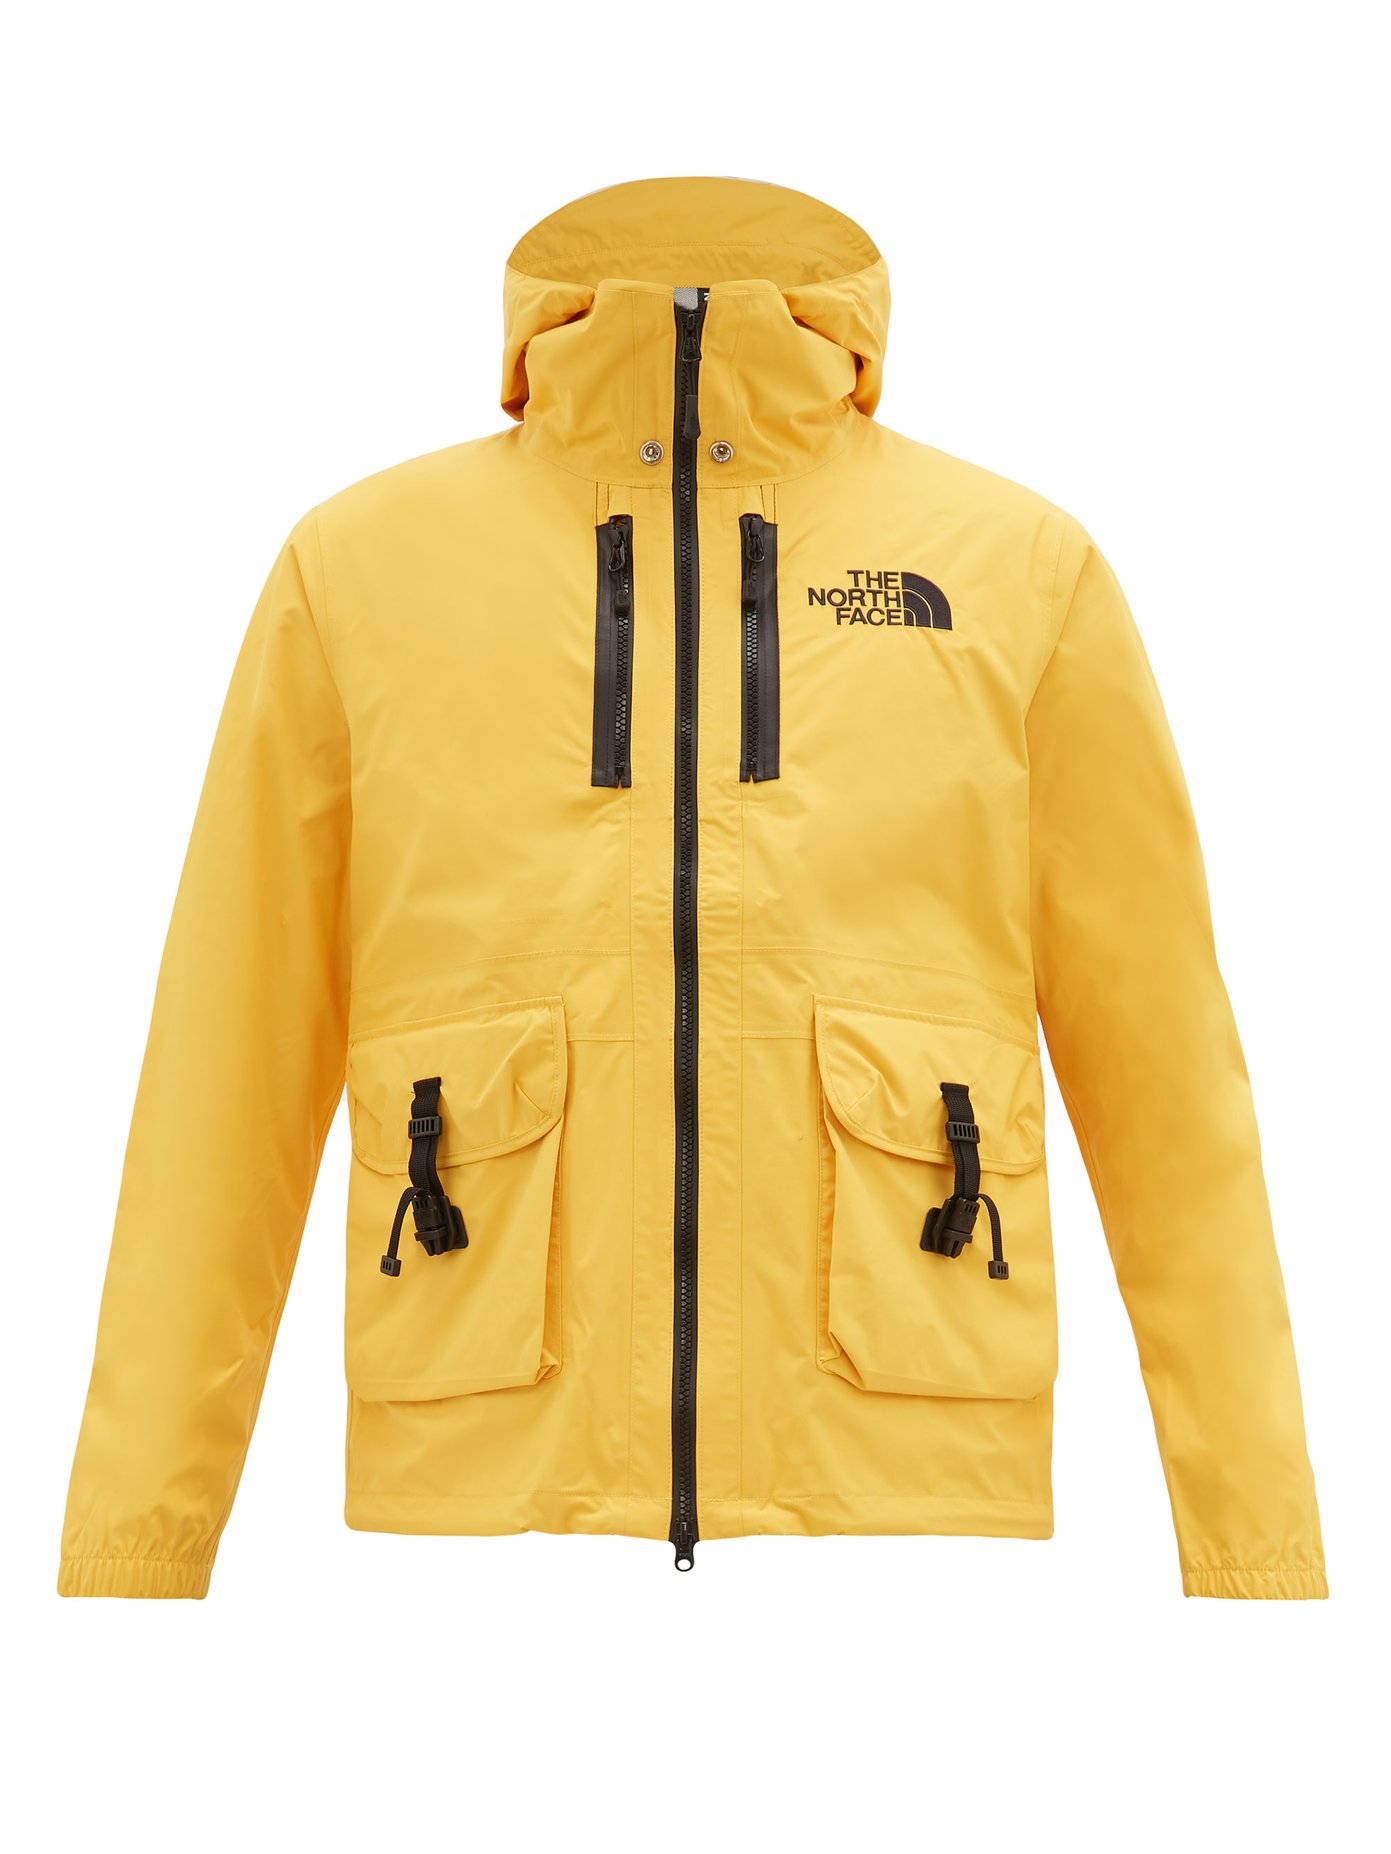 the north face black yellow jacket